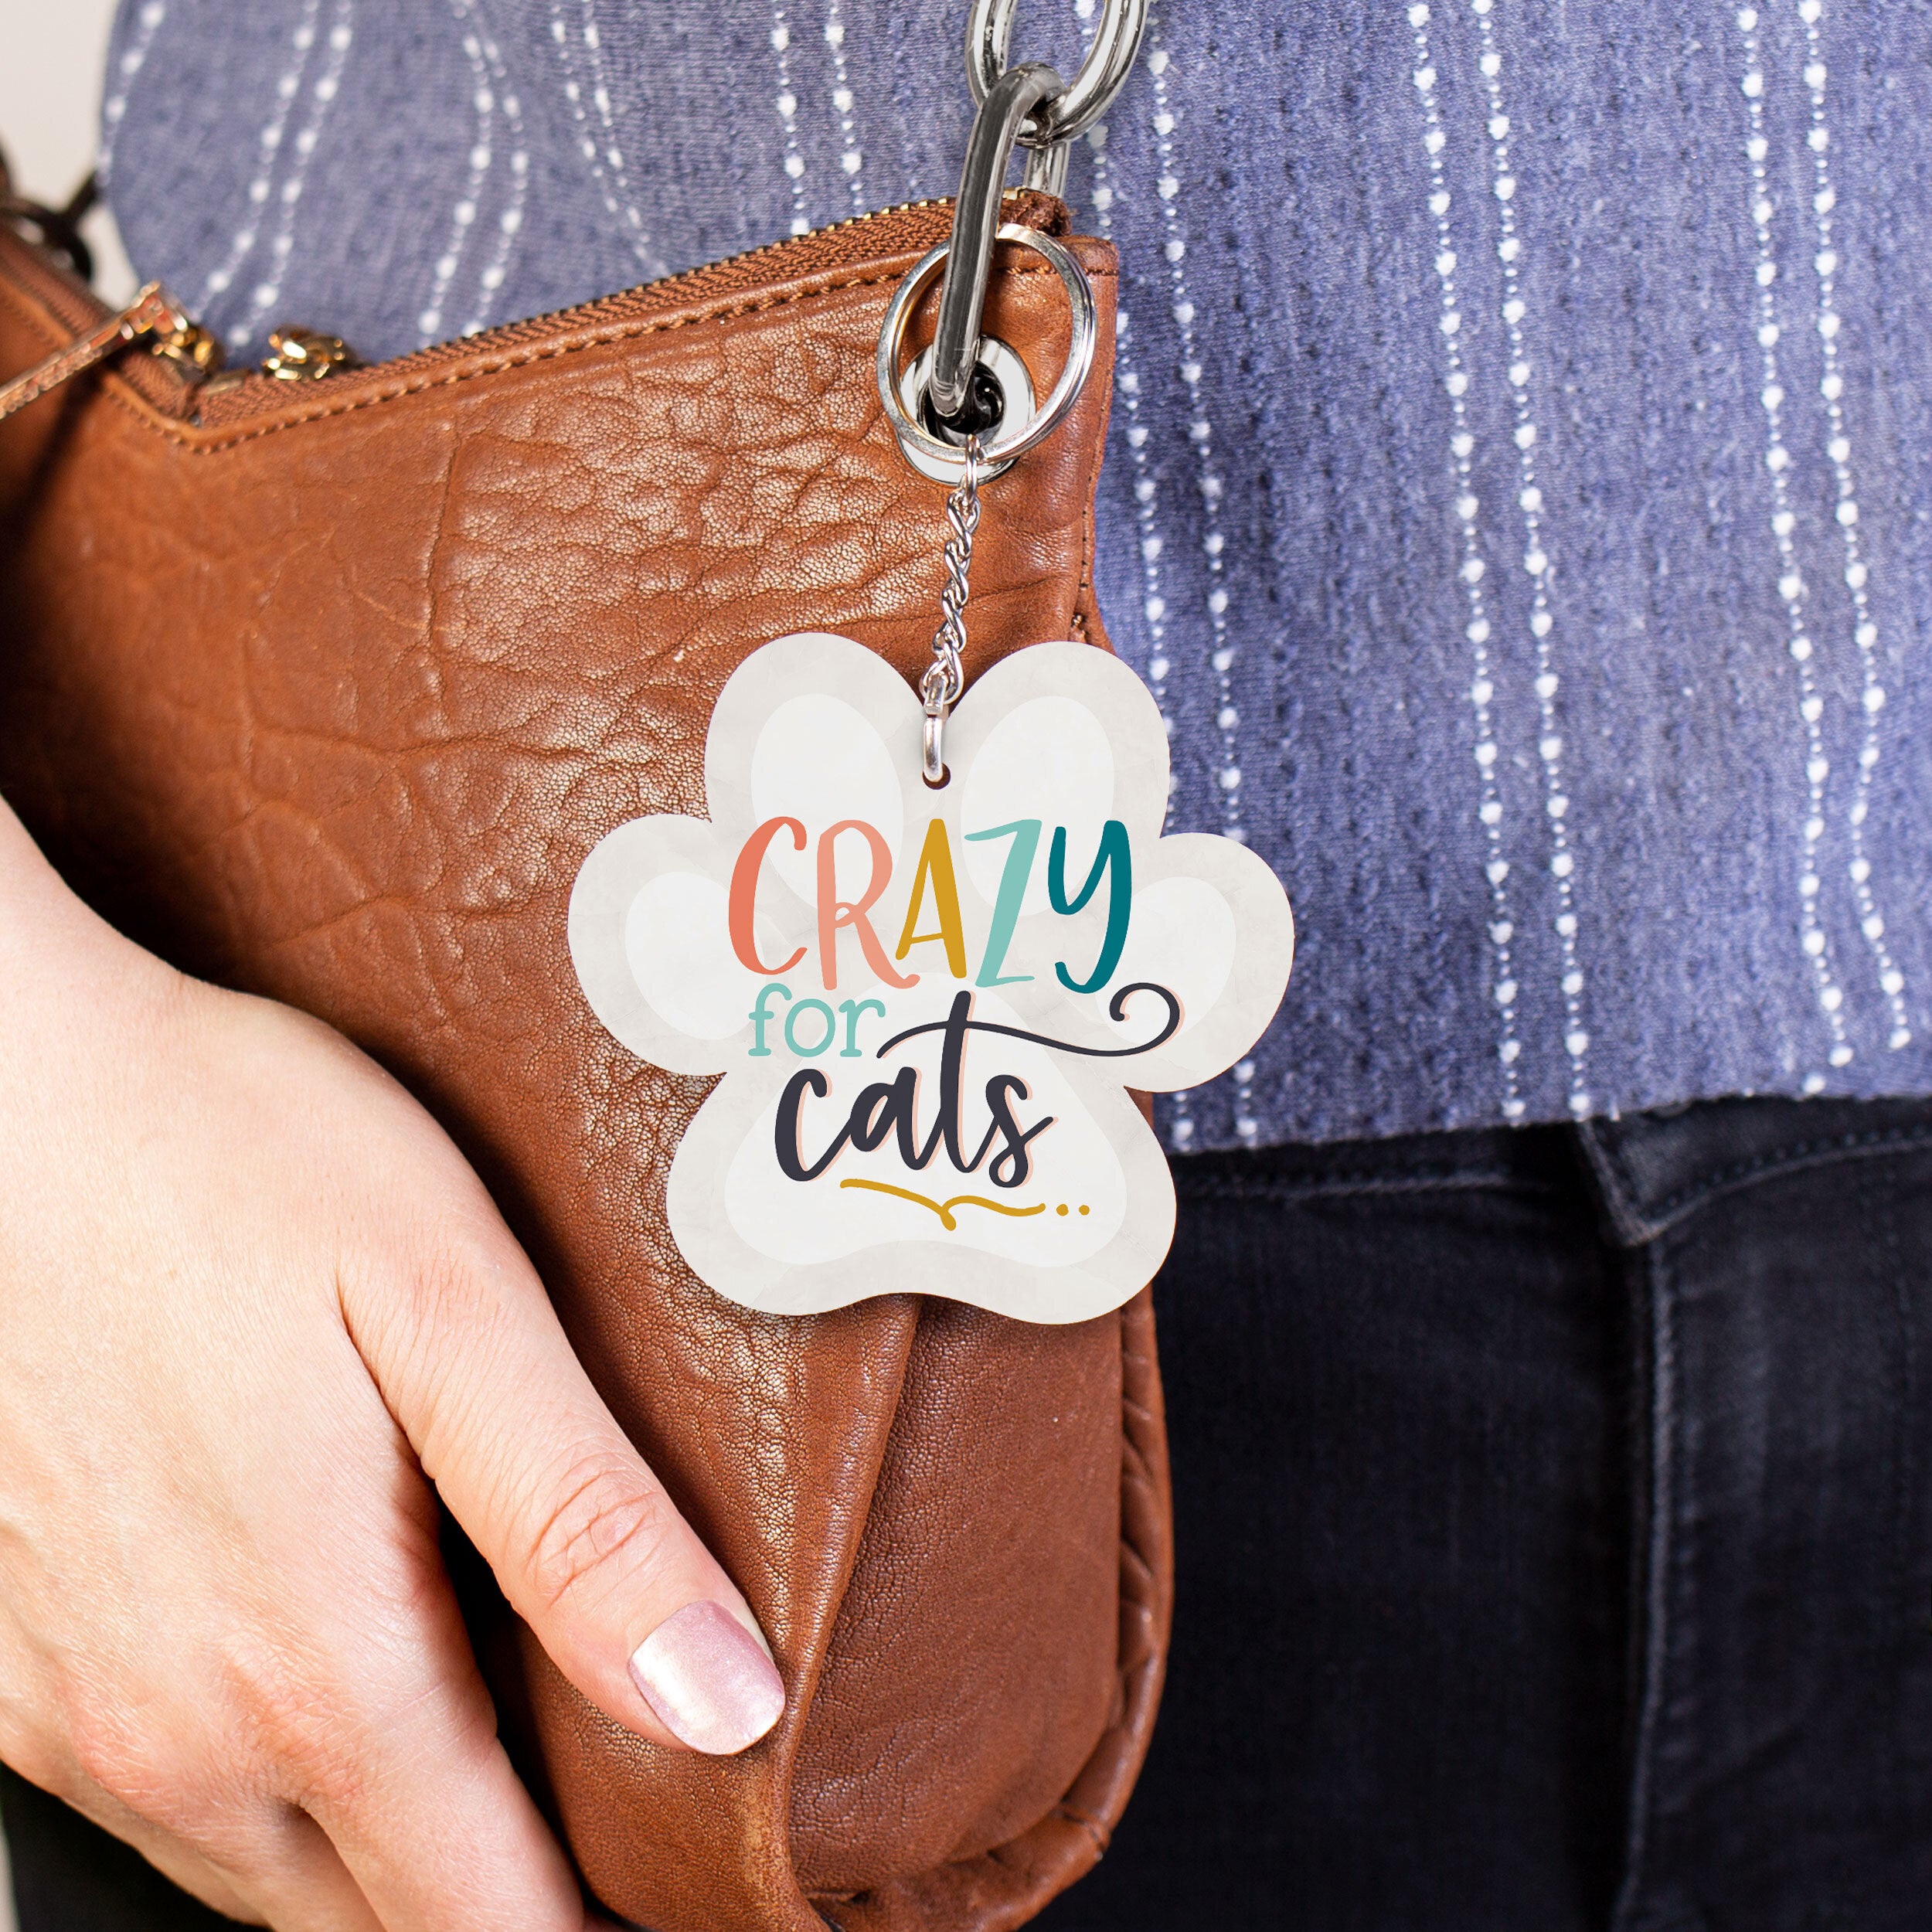 Crazy For Cats Acrylic Pawprint Shape Key Chain